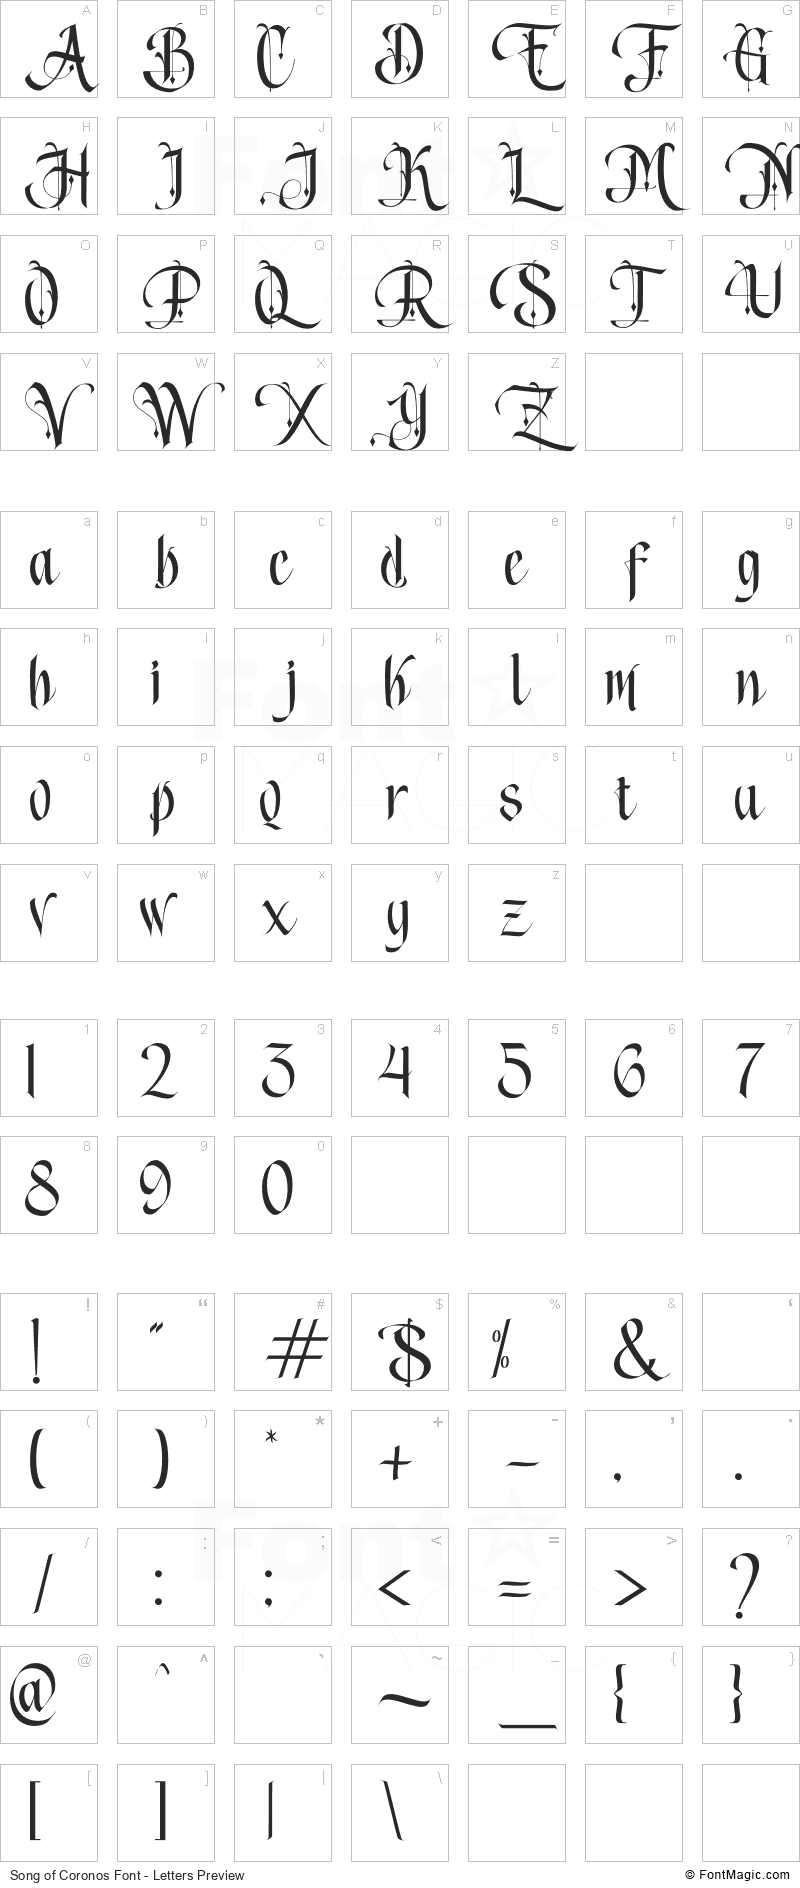 Song of Coronos Font - All Latters Preview Chart